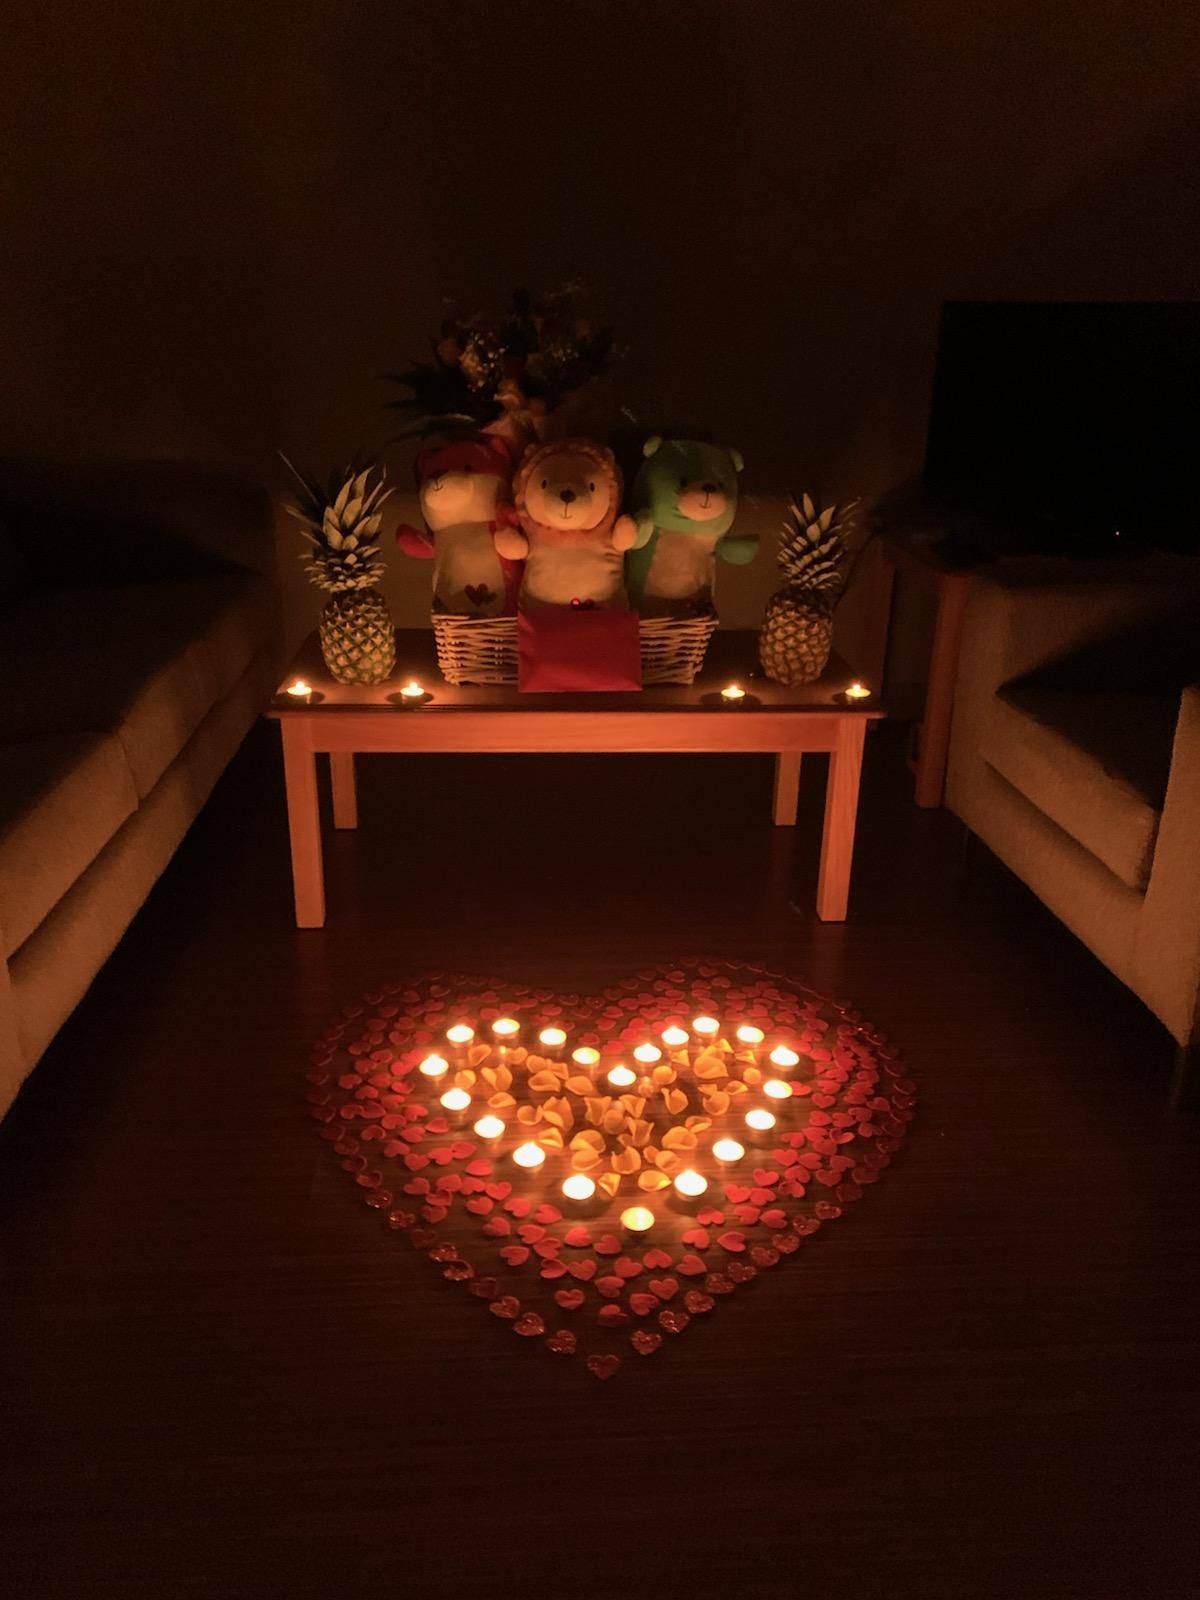 I tried being romantic and ended up creating a cult